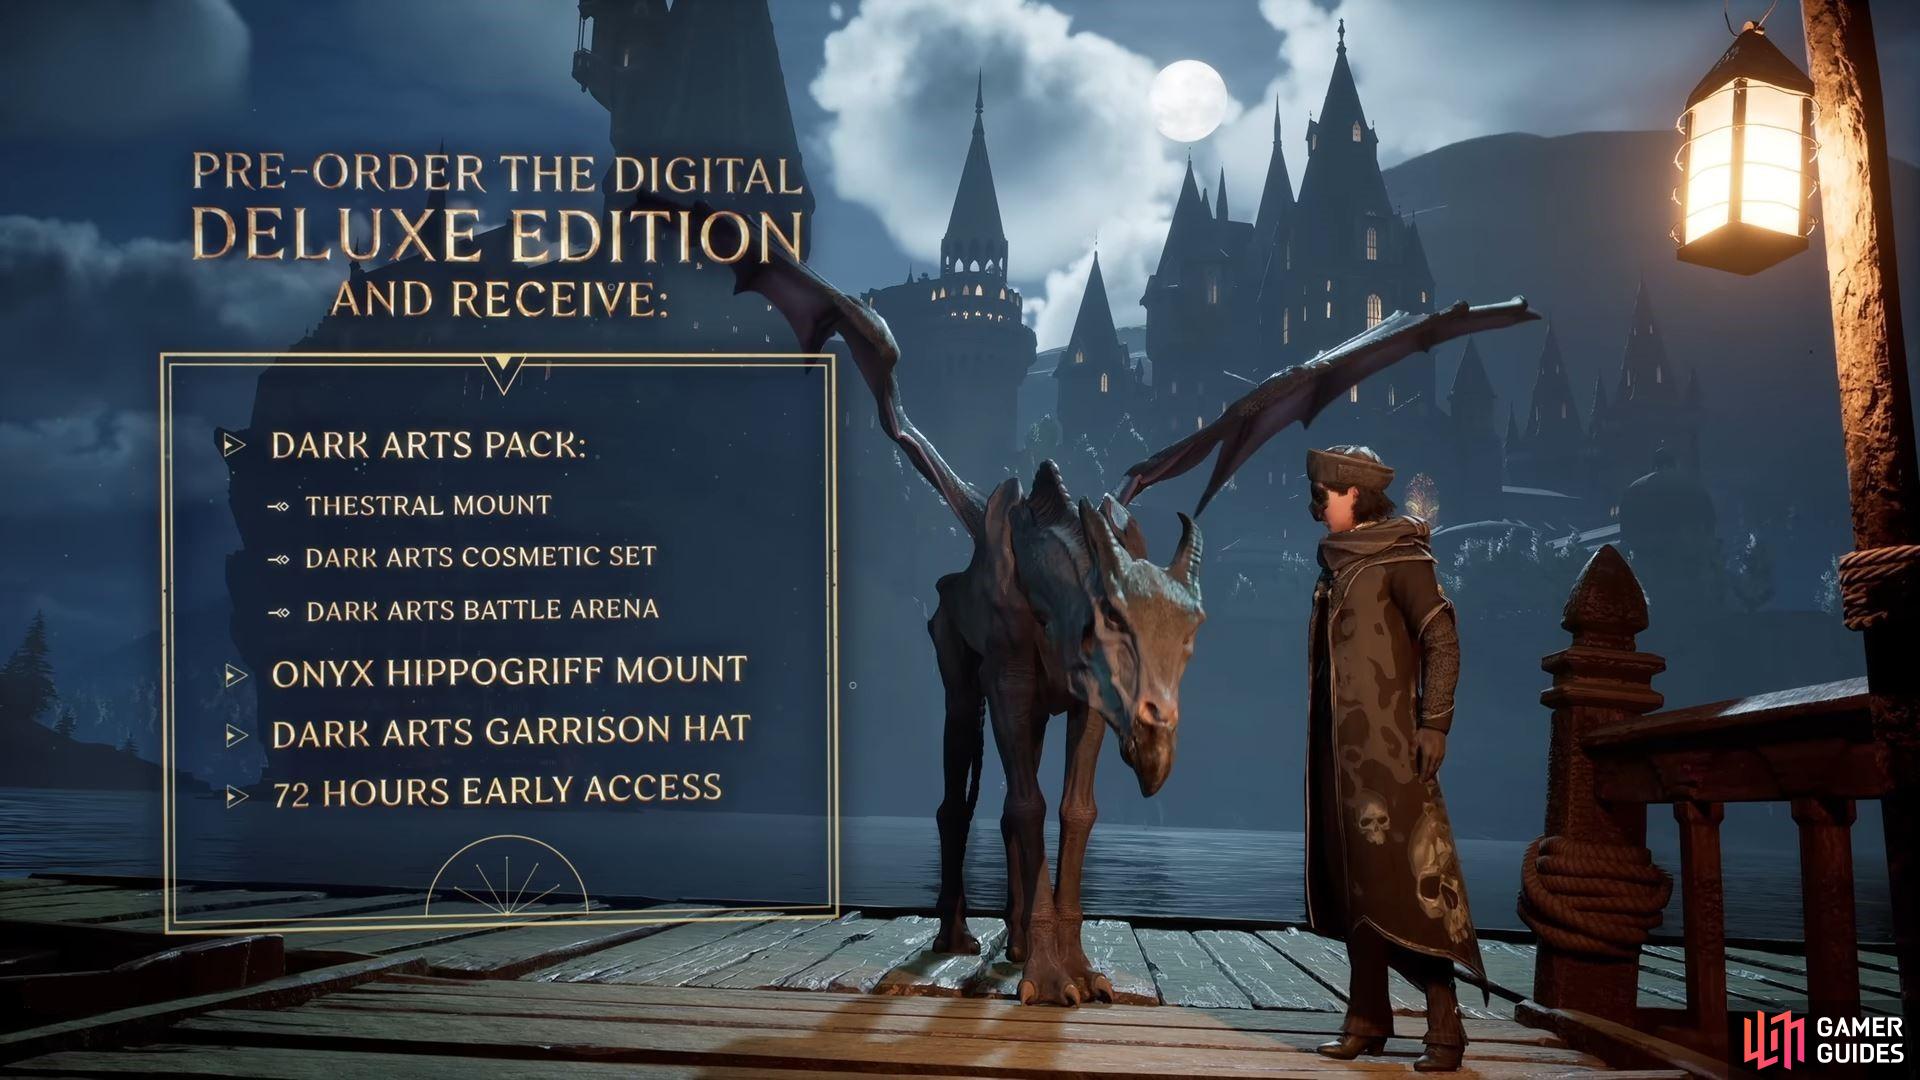 If you pre-order the Deluxe Edition, you'll get the Dark Arts pack and an extra Onyx Hippogriff Mount (which is also available to players who pre-order the standard edition). (Credit: Hogwarts Legacy Showcase).